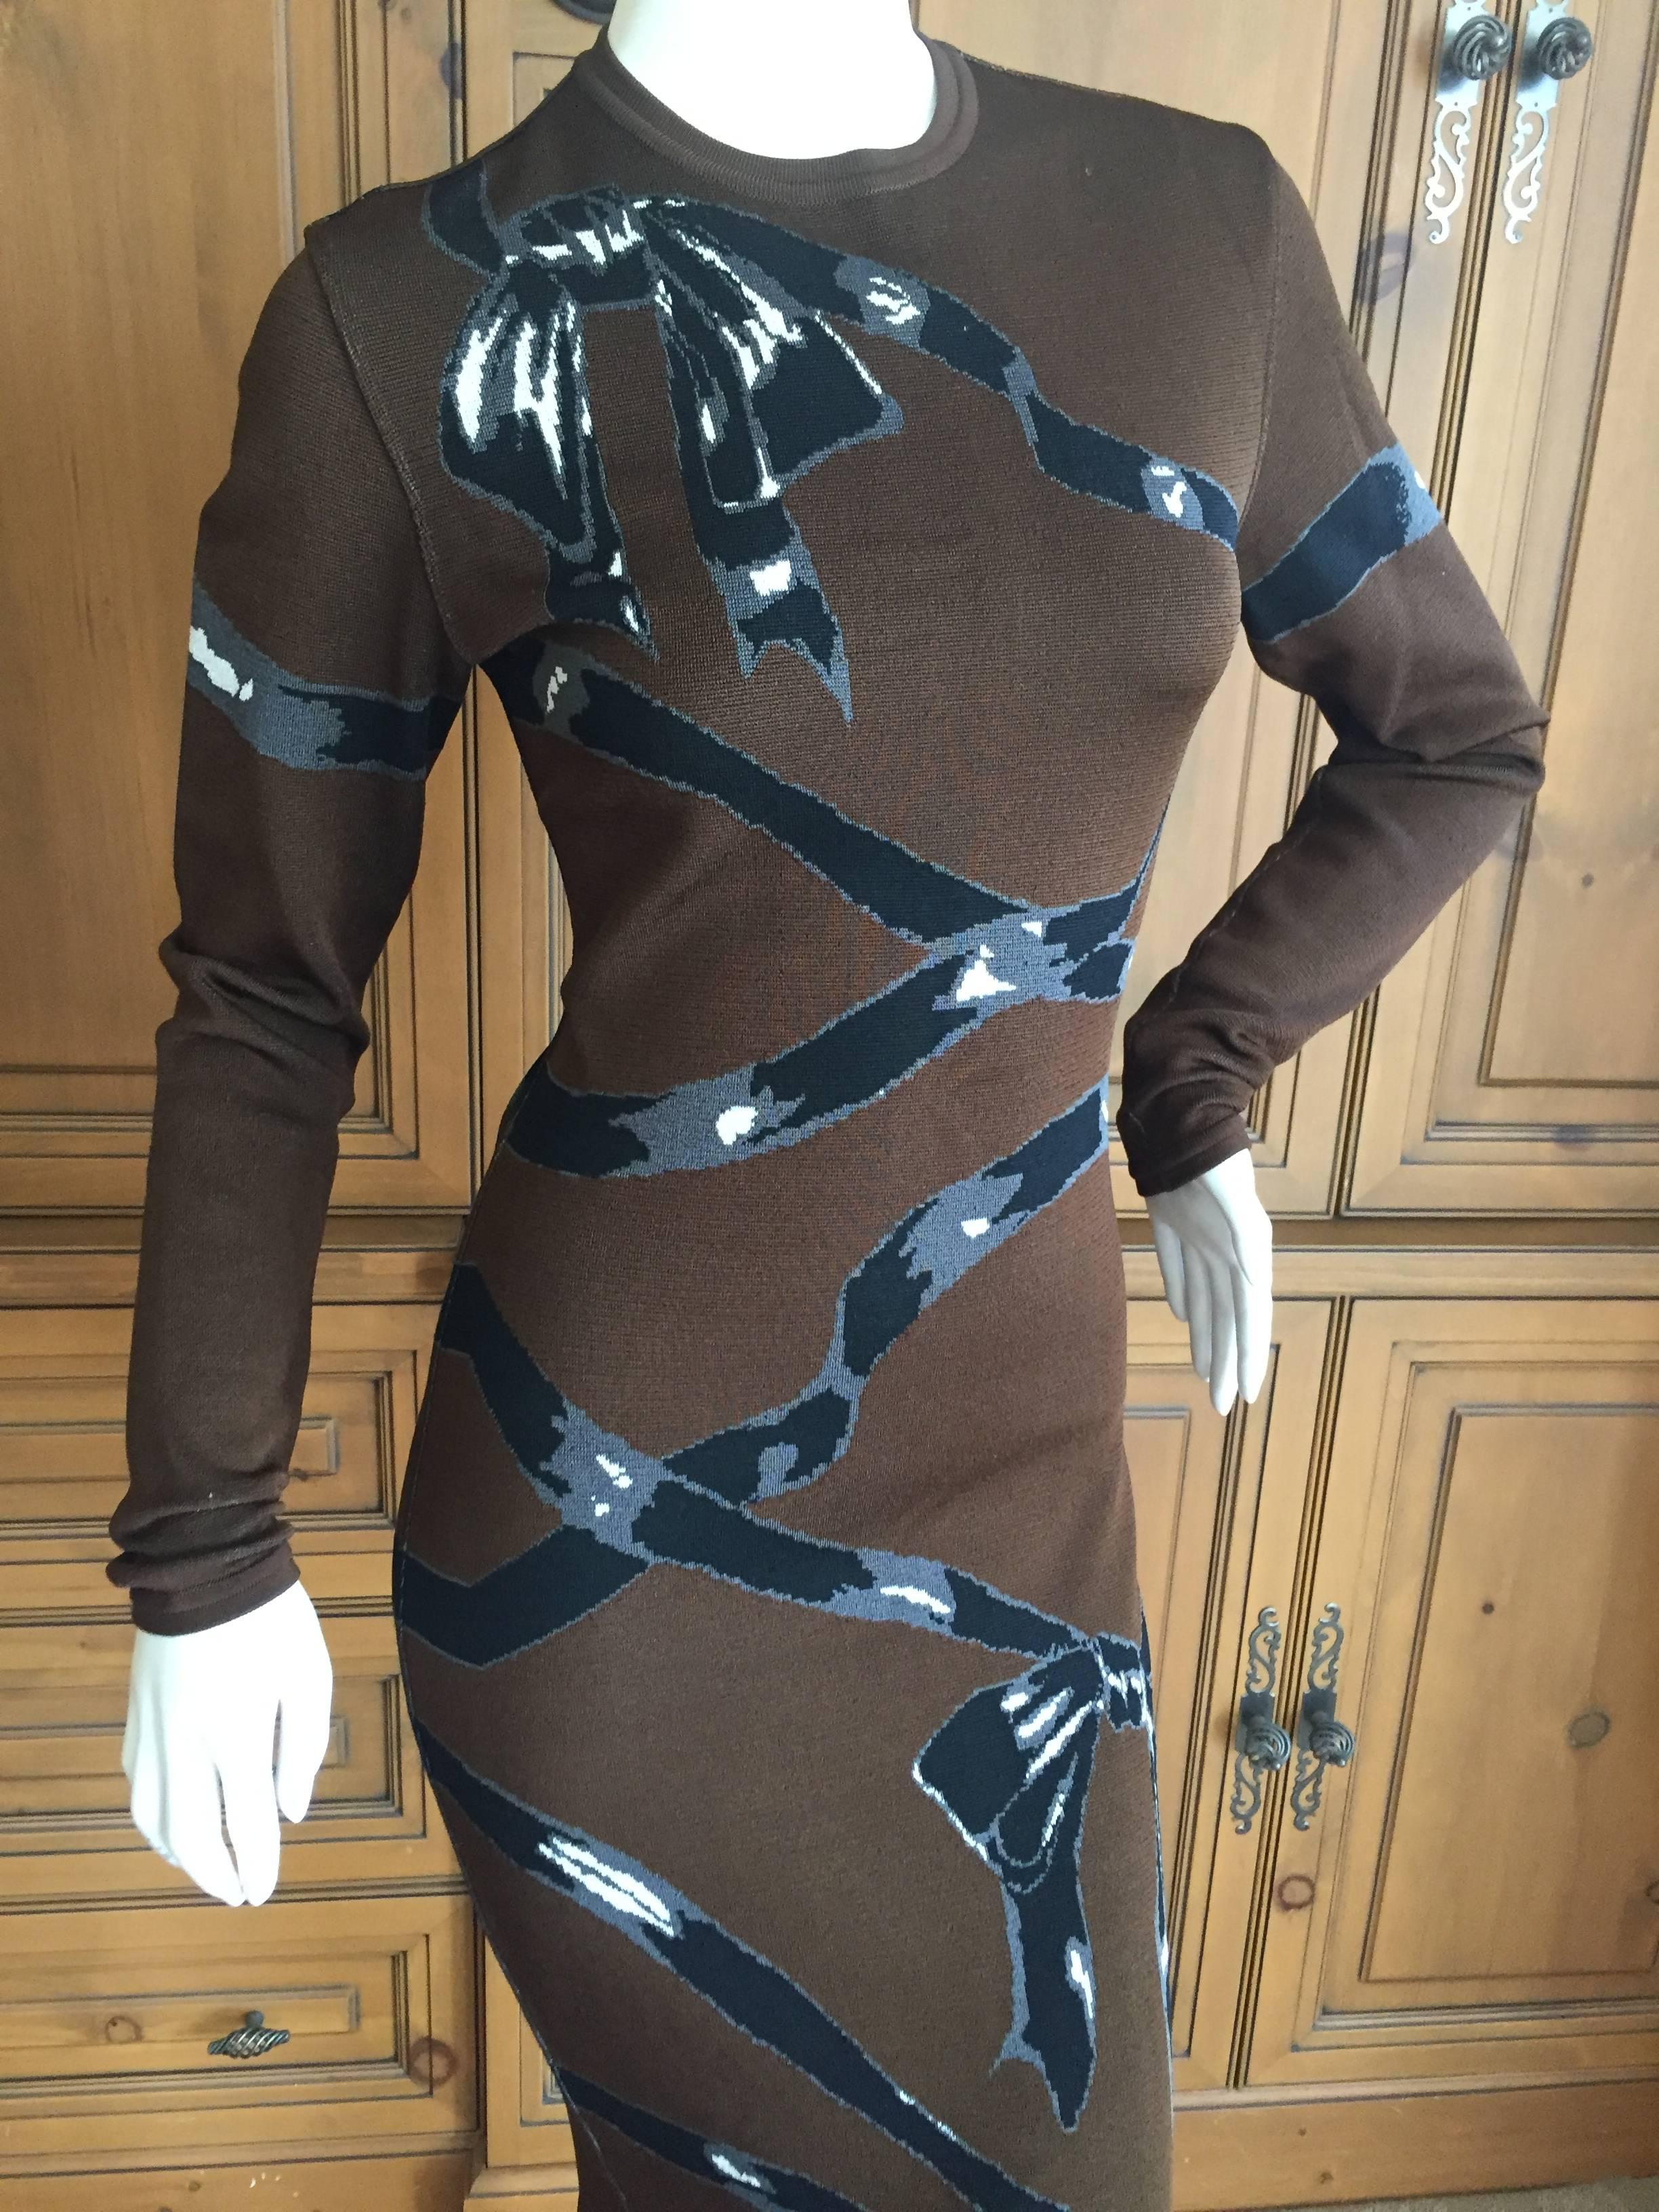 Wonderful late 1980's bodycon knit dress from Azzedine Alaia.
Inartsia pattern of black ribbons and bows on a brown background.
In excellent condition. 
Marked Size M.
There is a lot of stretch in this, the measurements are un stretched.
Bist